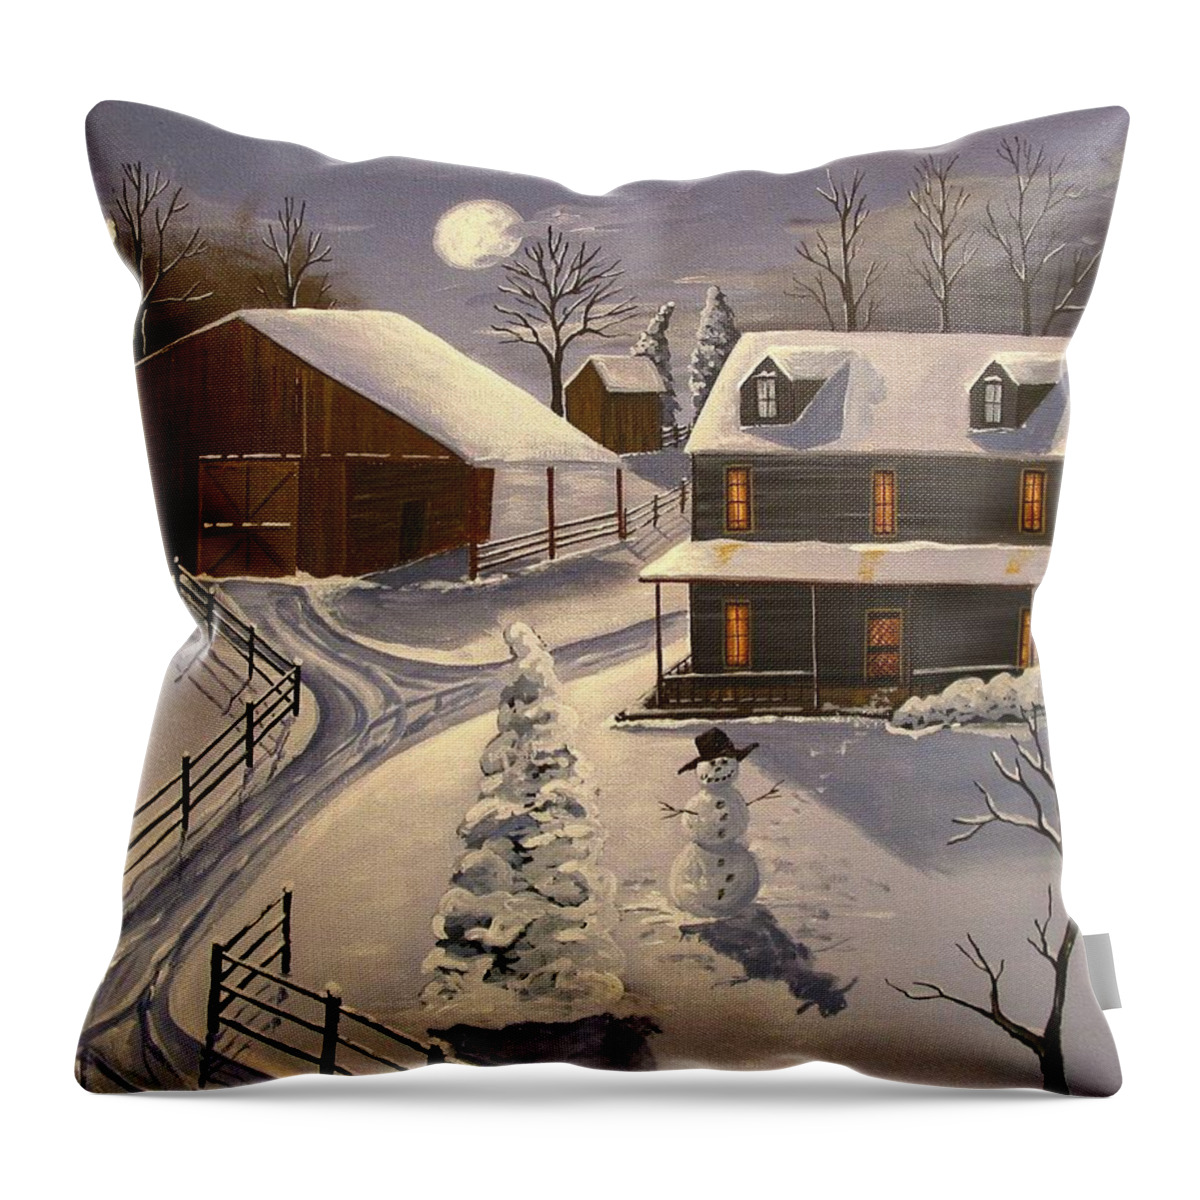 Folk Art Throw Pillow featuring the painting Snow - Silence And Warmth by Debbie Criswell